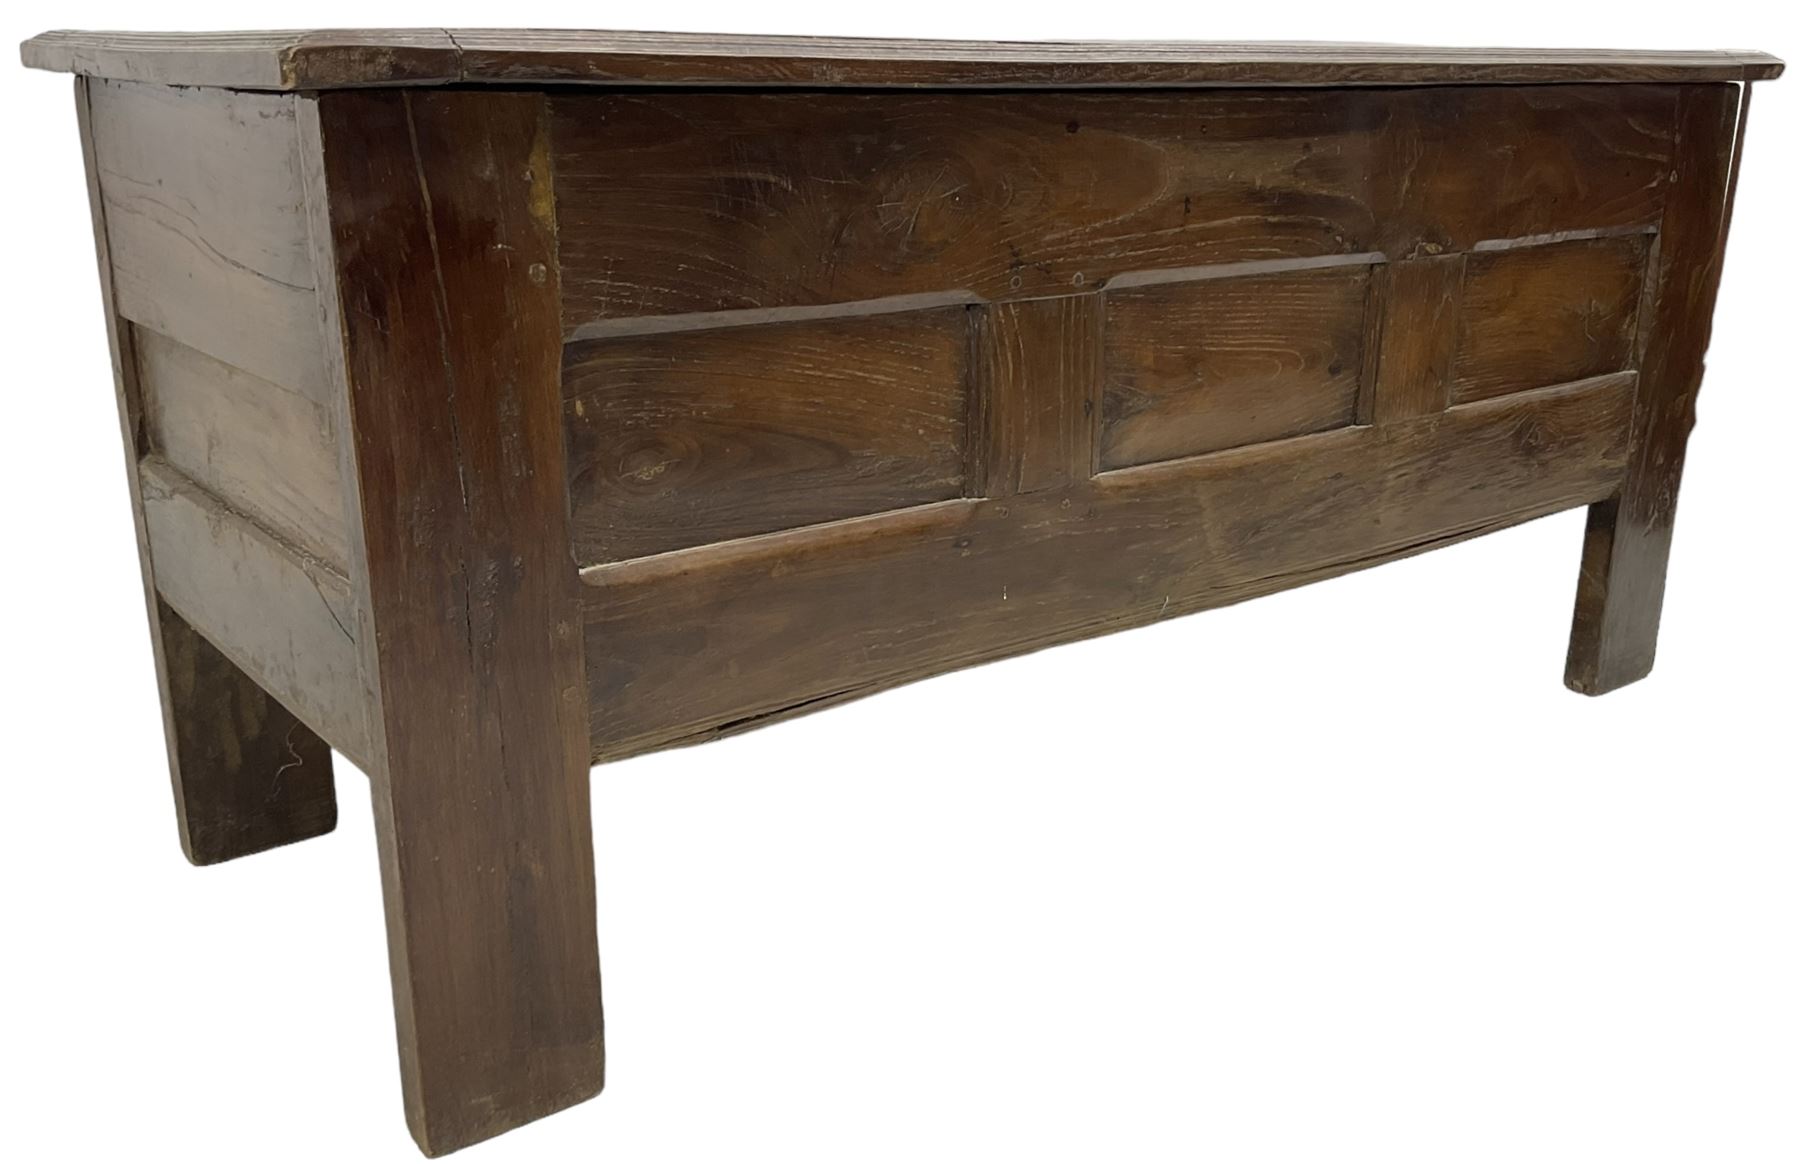 Large 18th century oak coffer or chest - Image 9 of 9